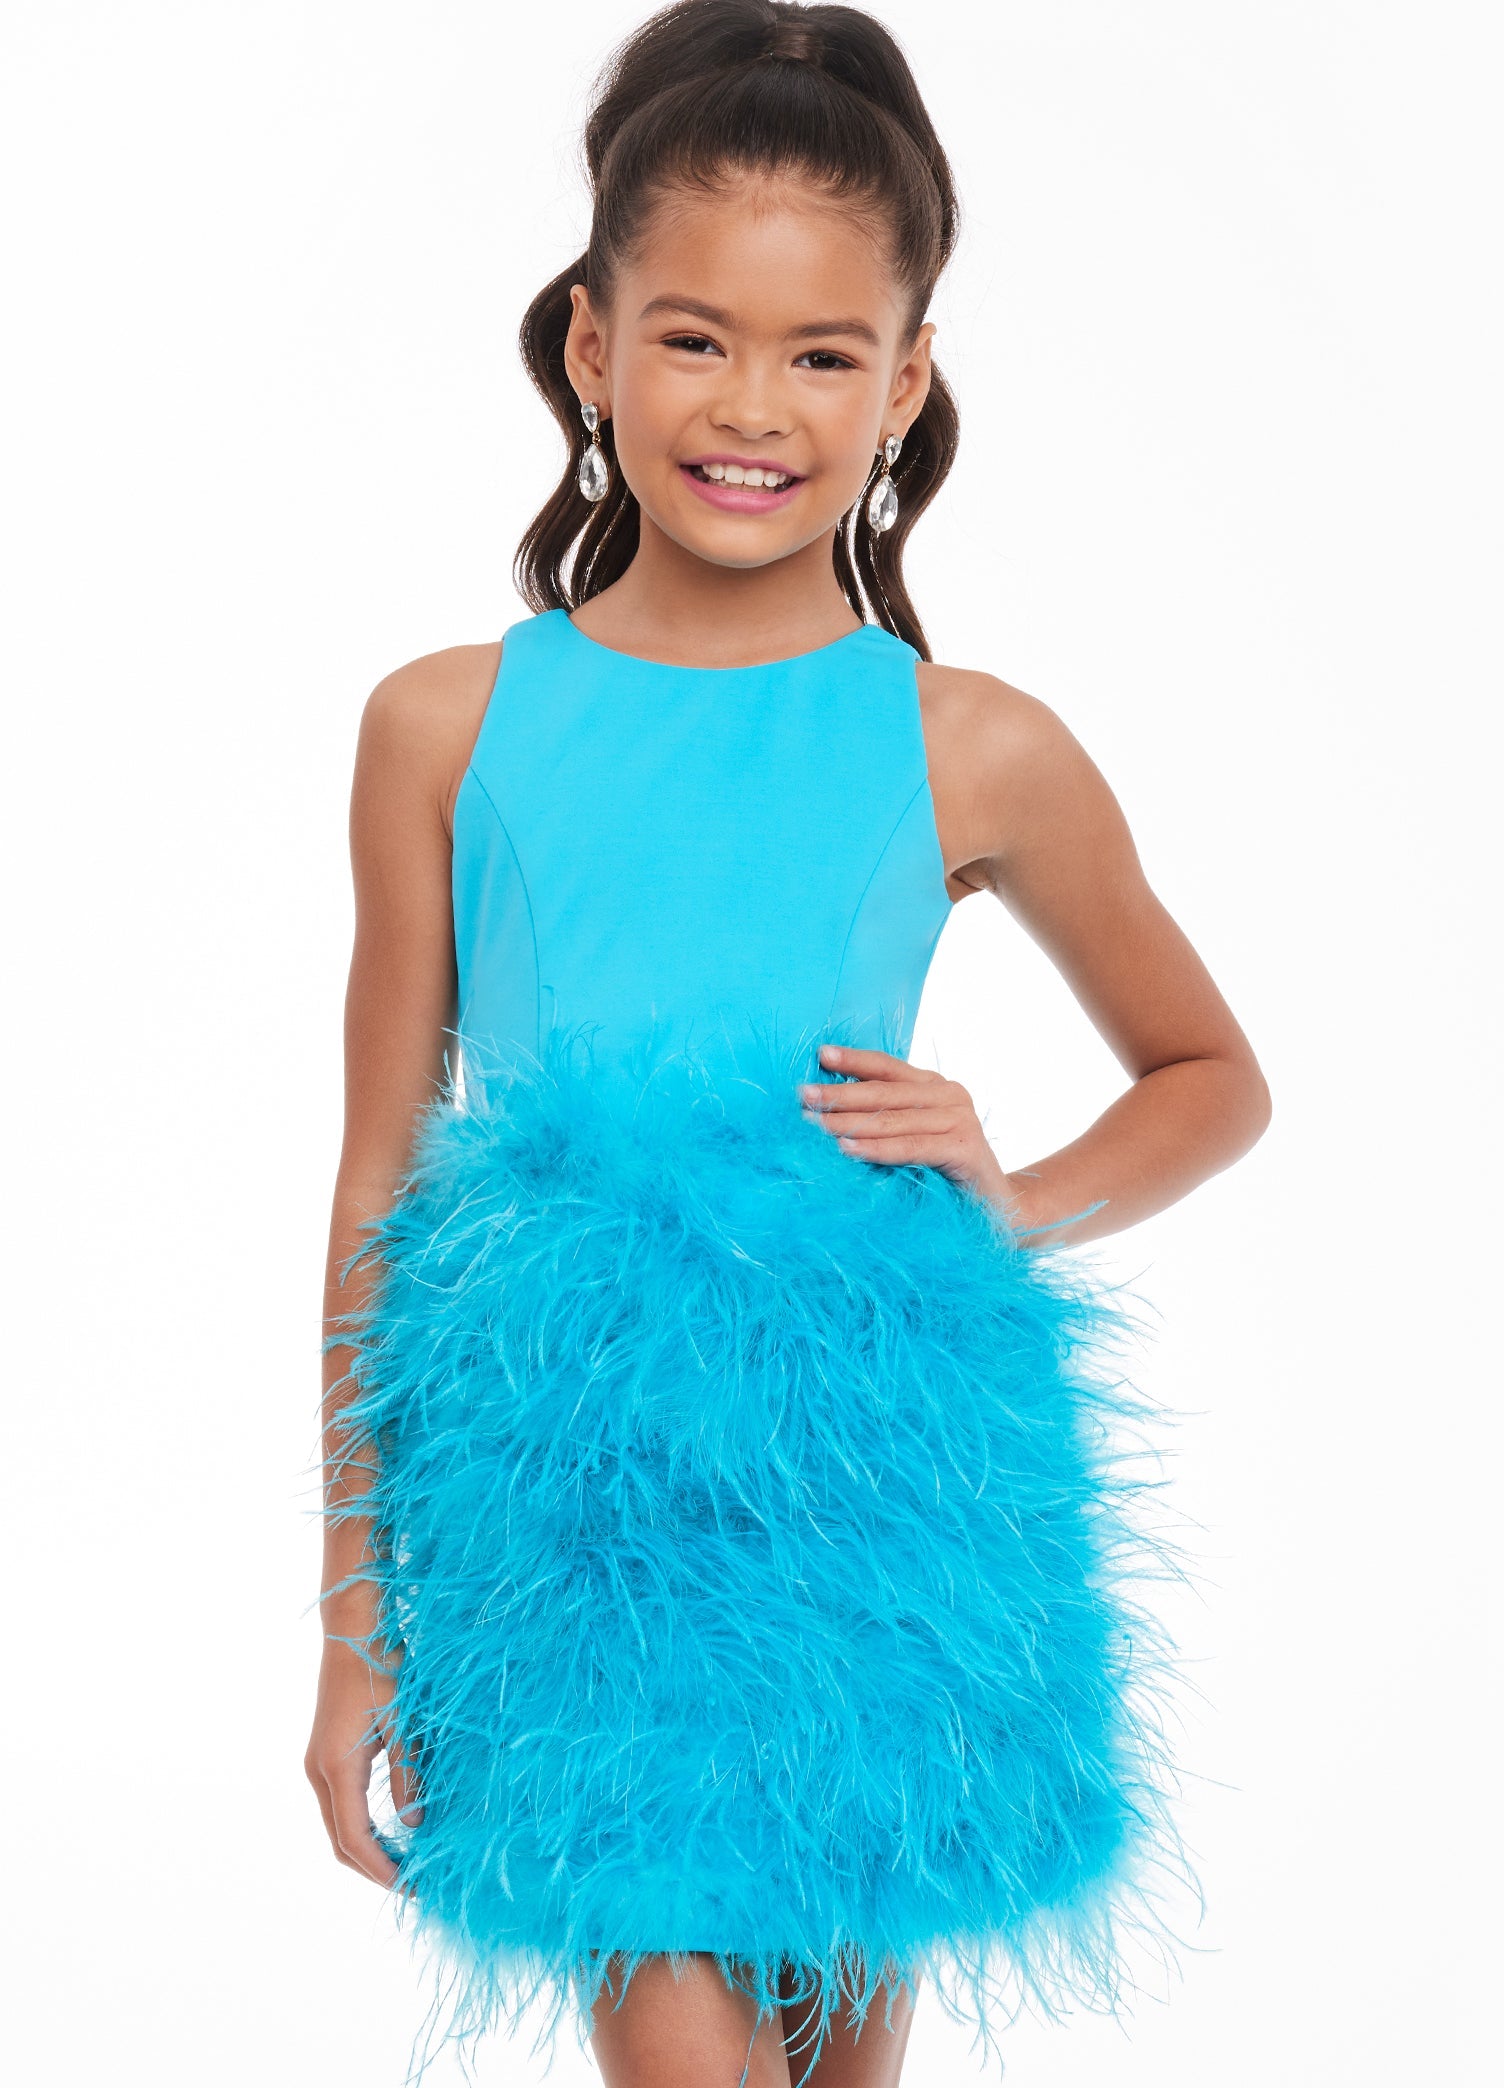 Ashley Lauren Kids 8132 Short Feather skirt cocktail girls Pageant Dress Cutout back Fabulous in feathers! This kids cocktail dress features a scuba bustier giving way to a full feather skirt and open back. Crew Neckline Open Back Scuba Feathers Available Sizes: 2-16 Available Colors: Turquoise, Hot Pink, White